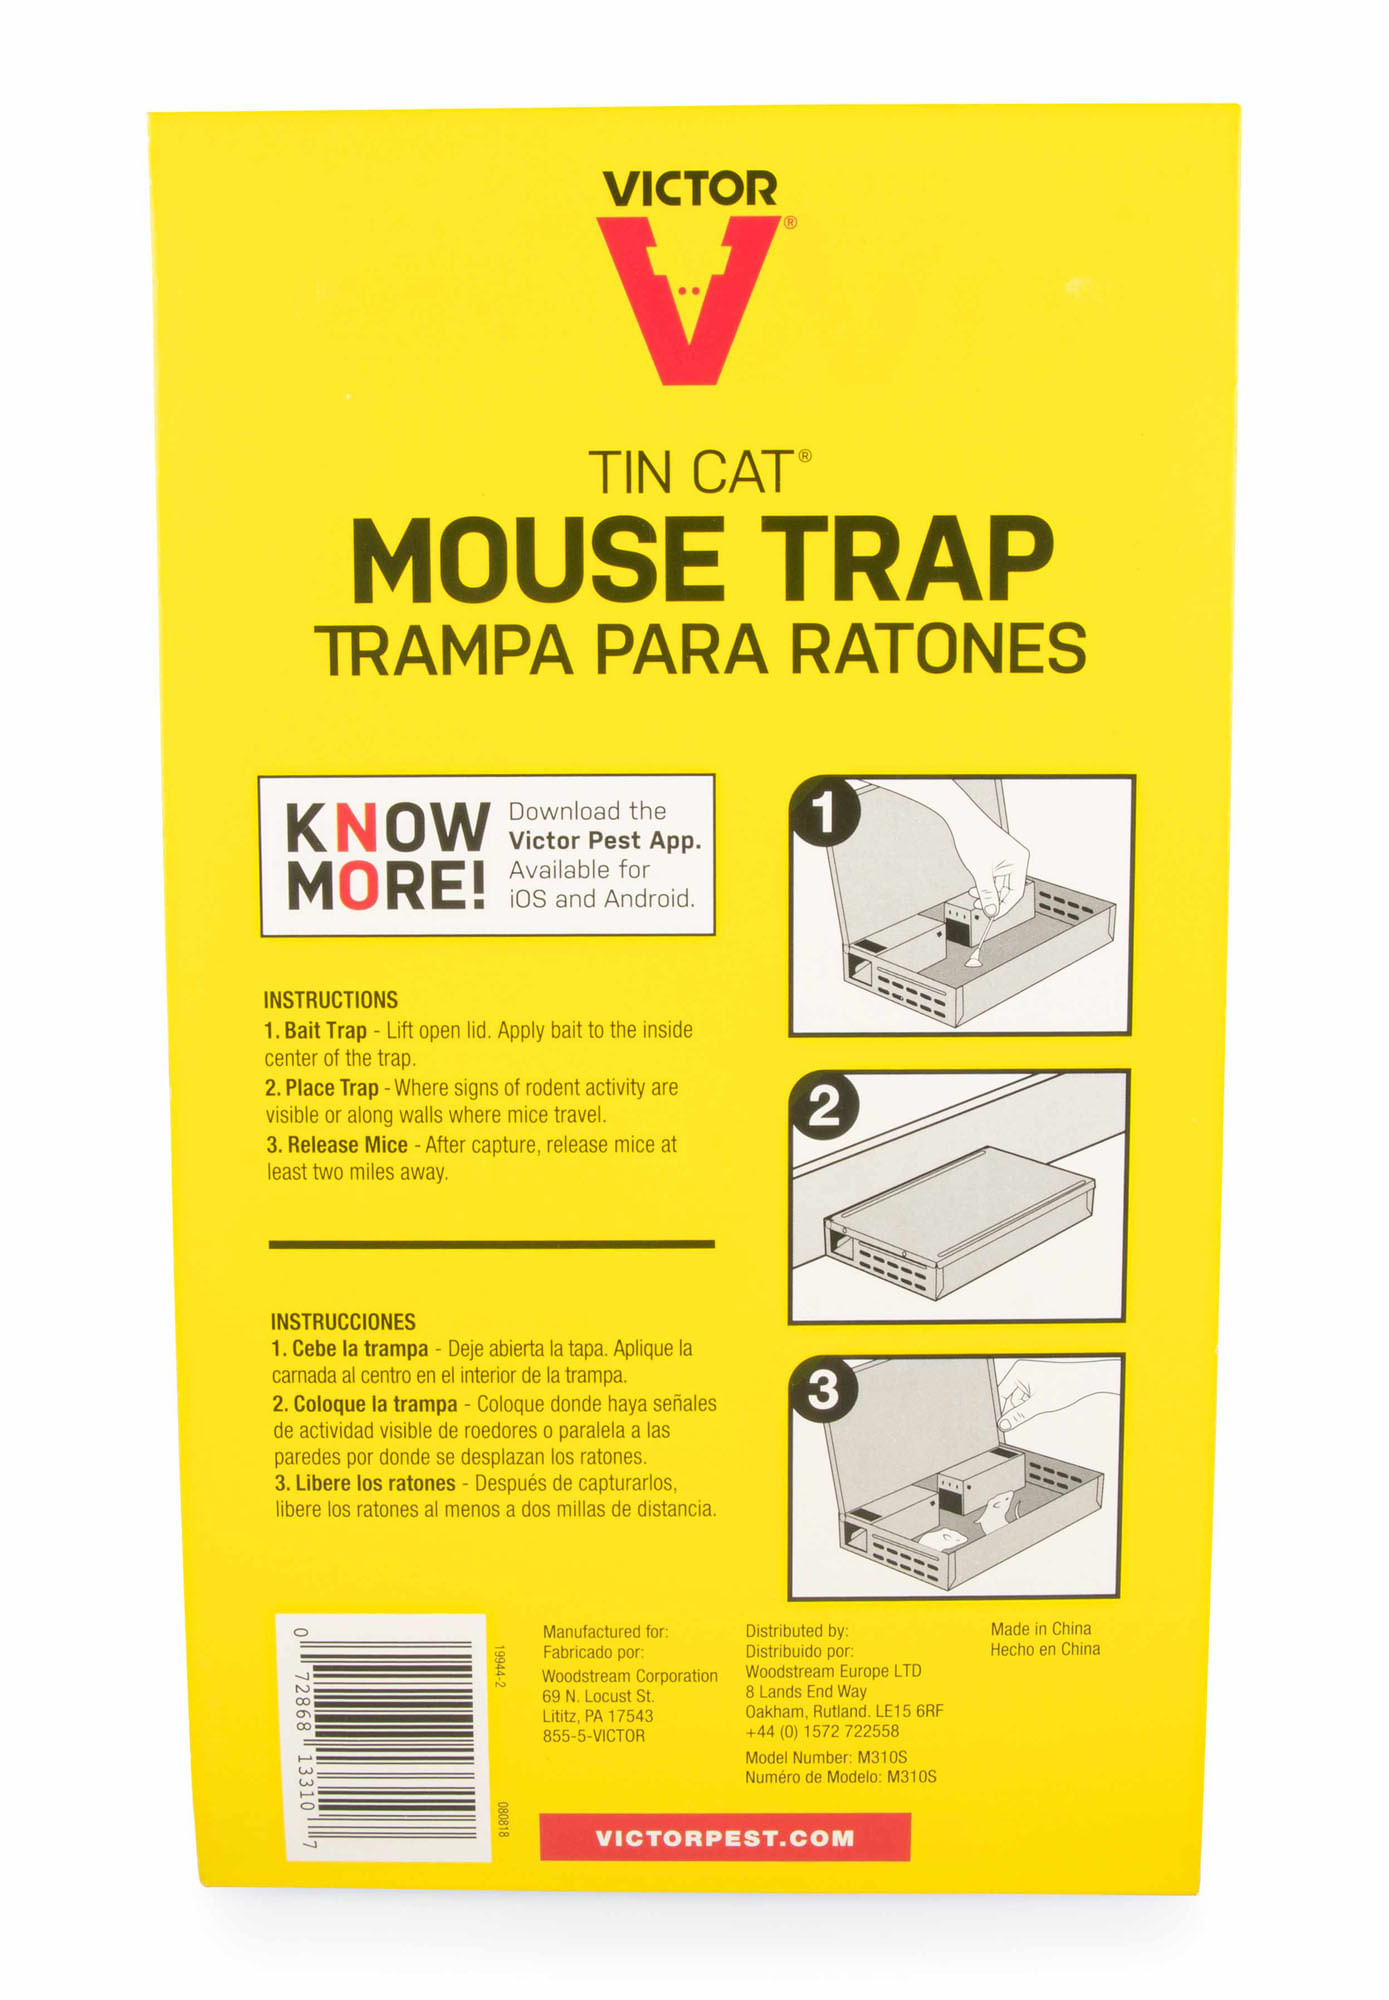 Tin Cat Repeating Mouse Trap - Jeffers